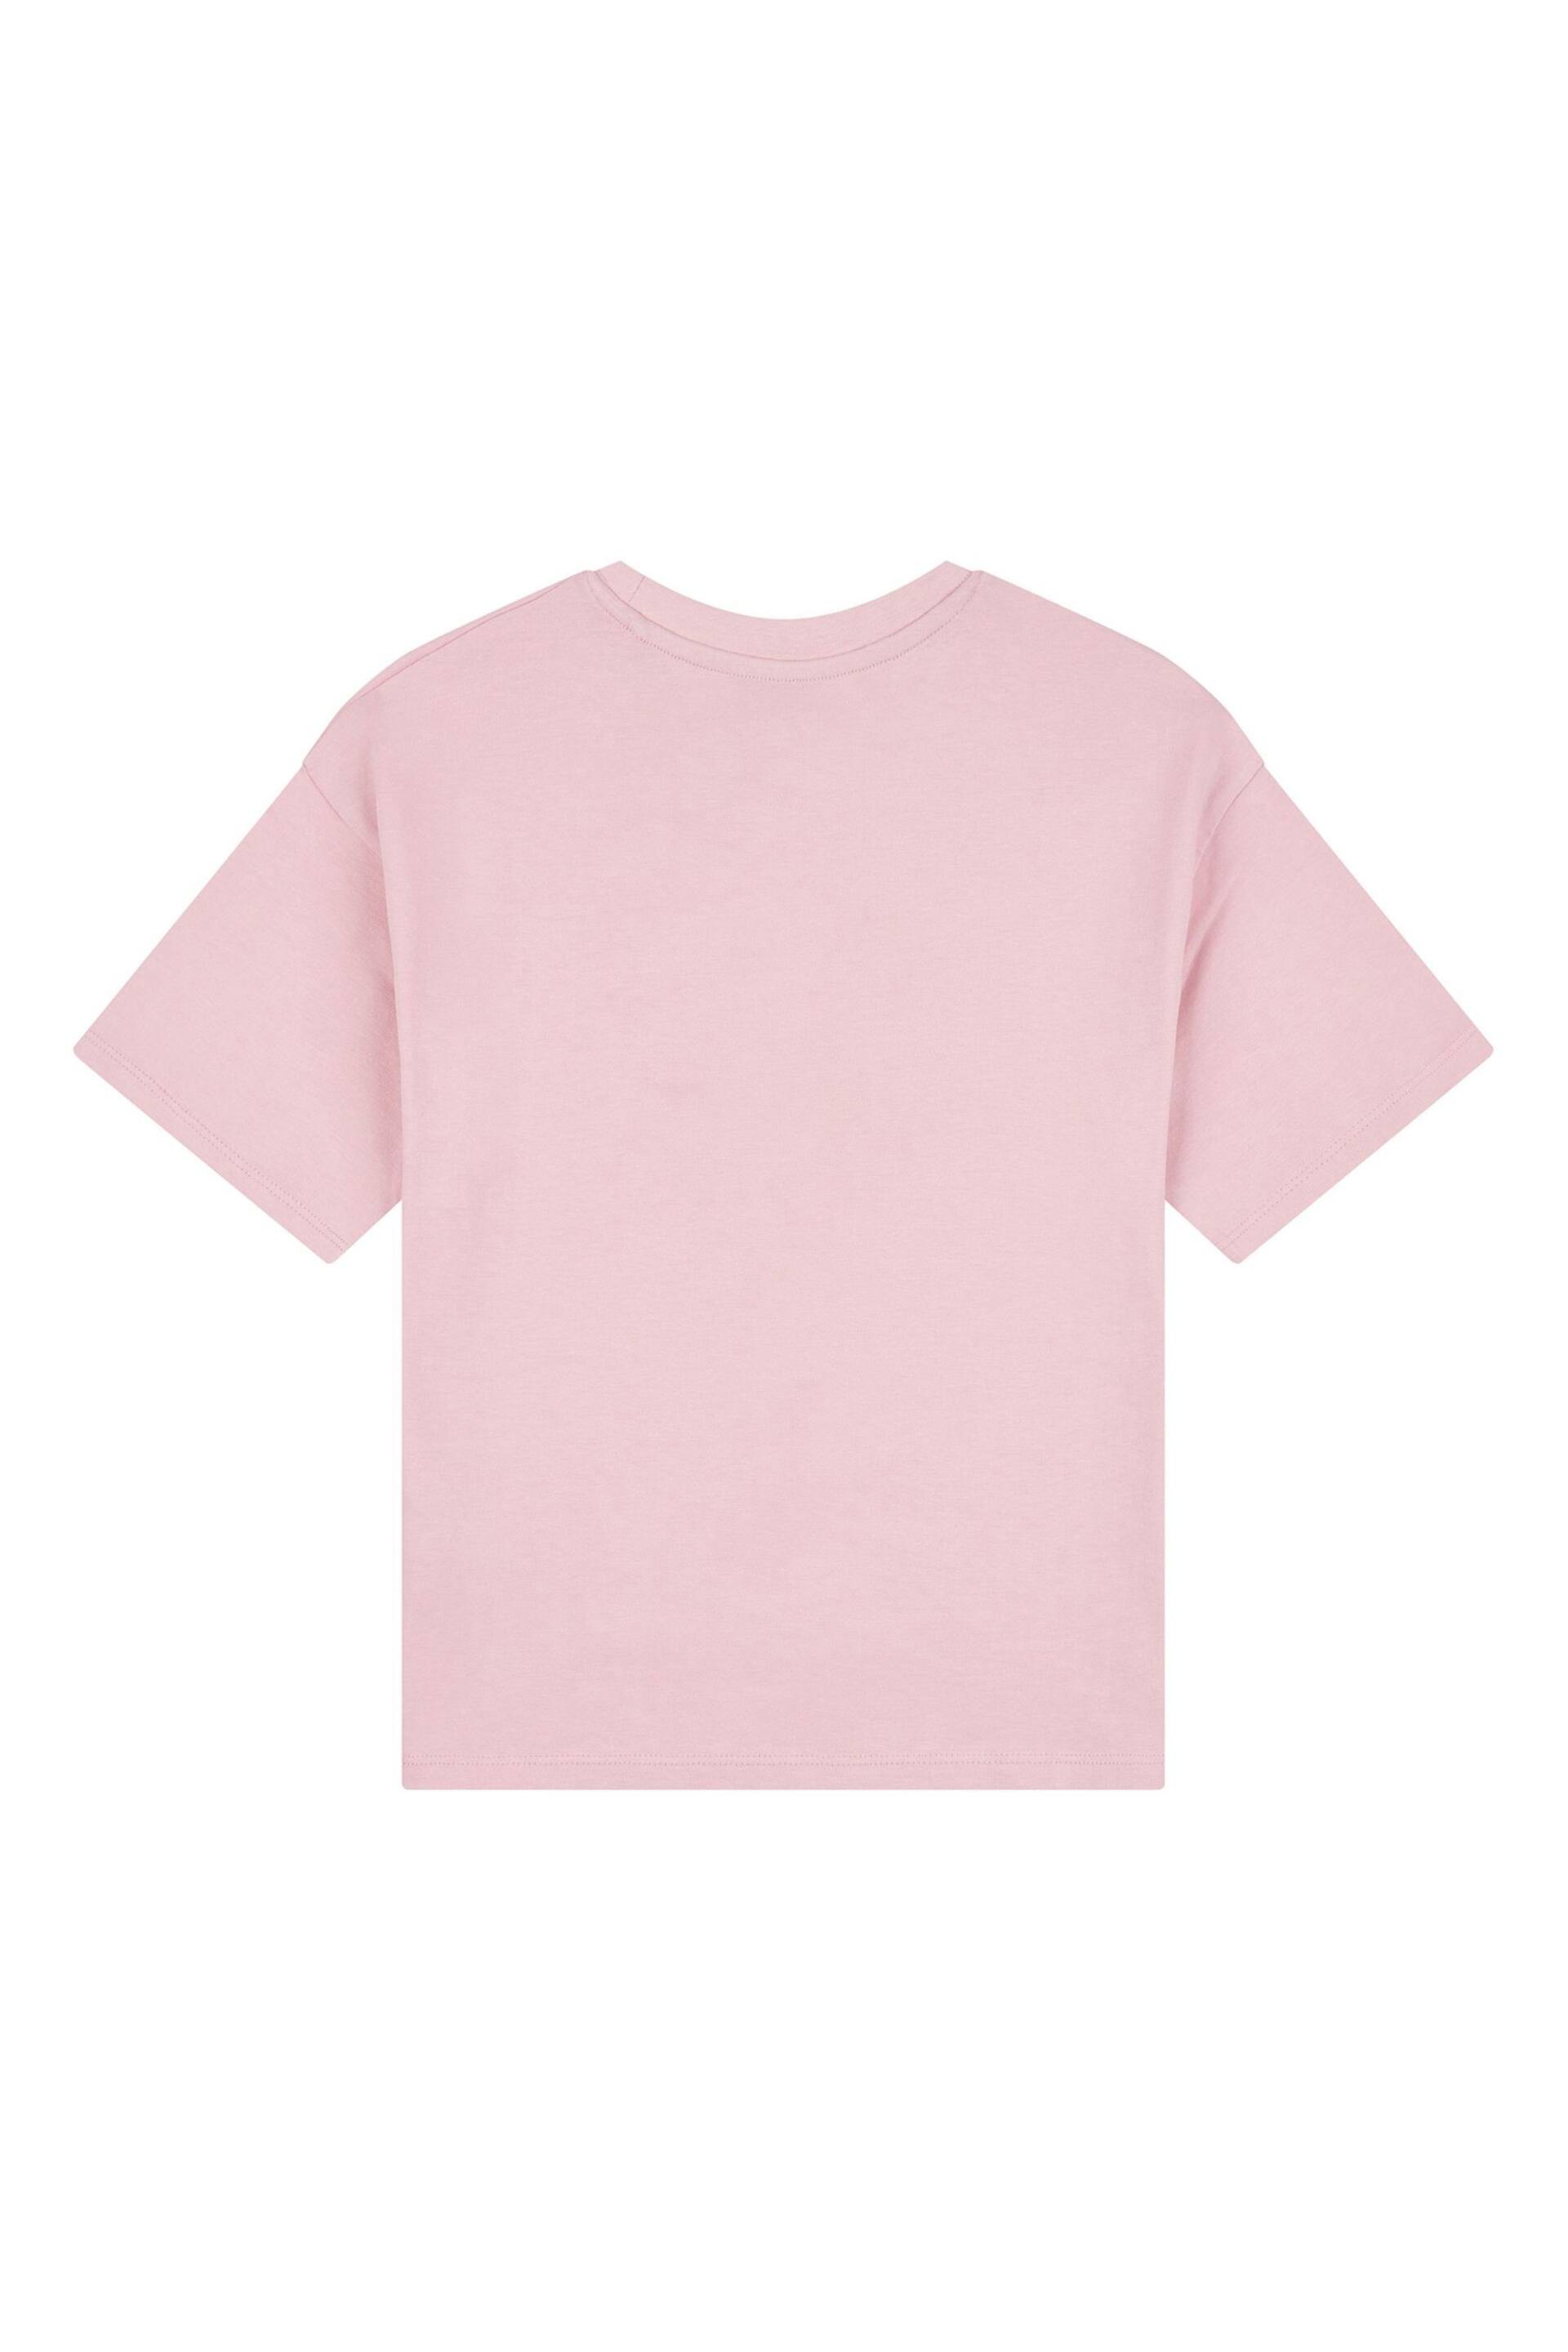 Lee Girls Pink Check Graphic Boxy Fit T-Shirt - Image 8 of 9